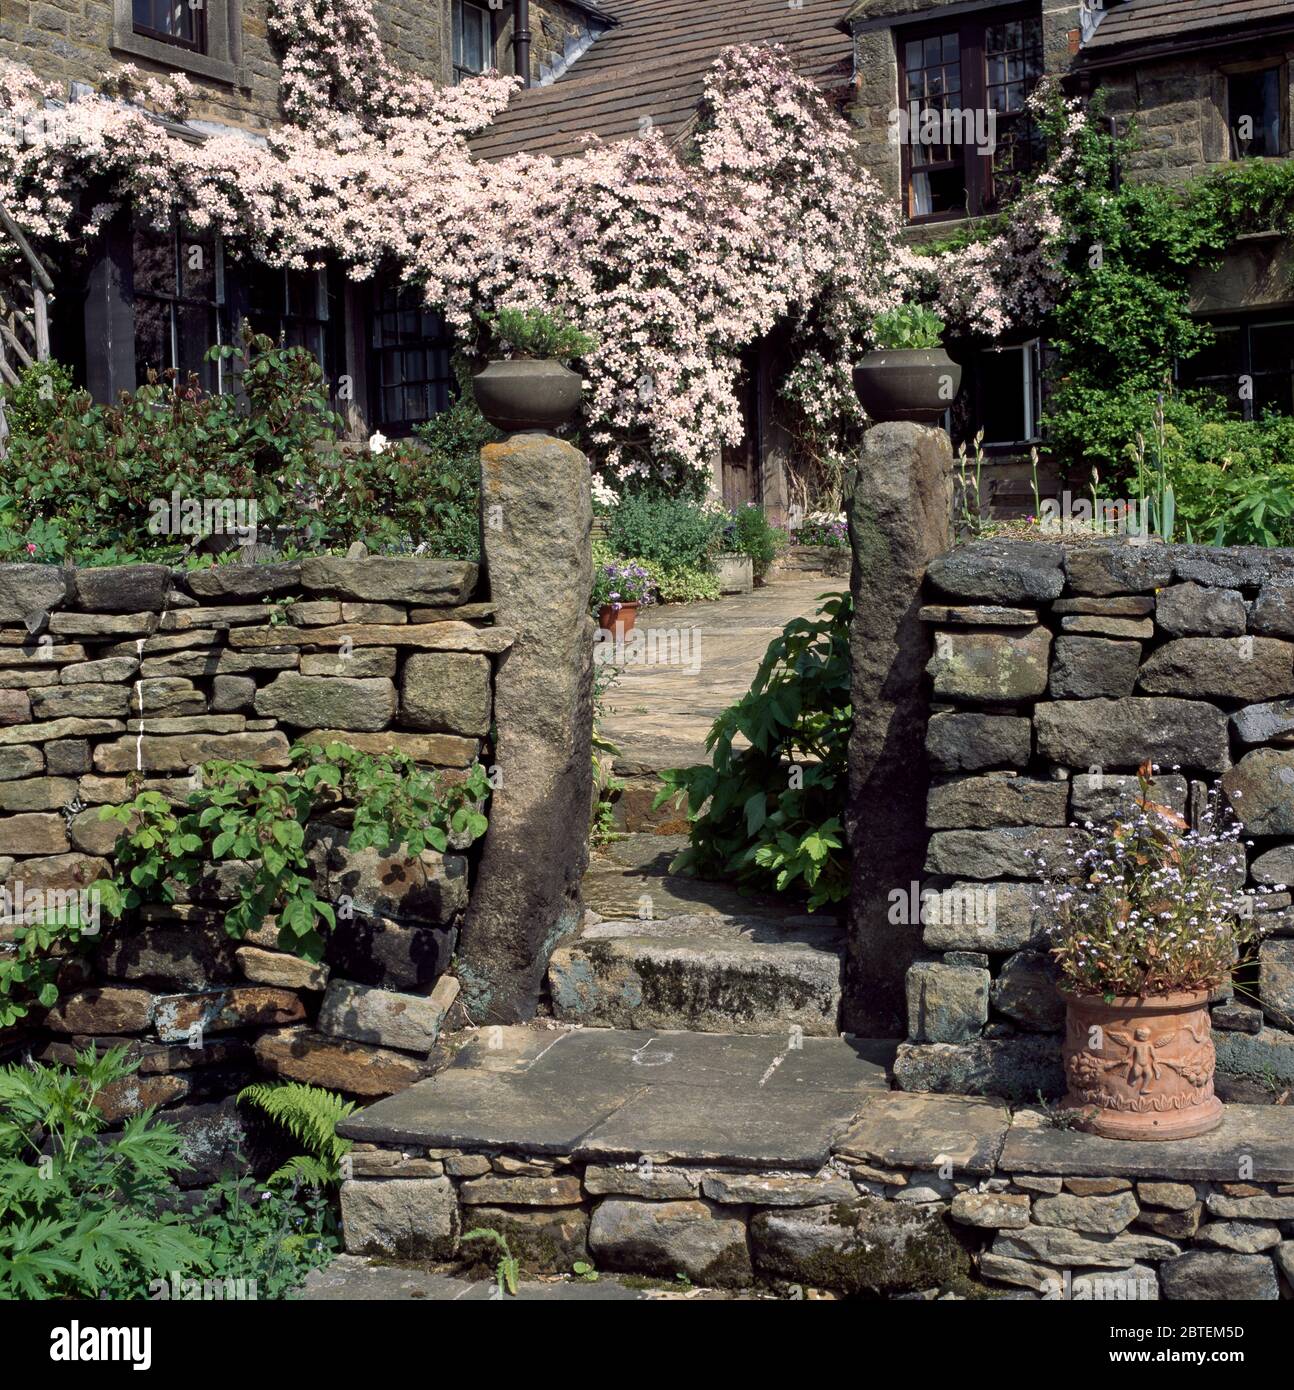 Old stone gate posts on drystone wall in garden Stock Photo